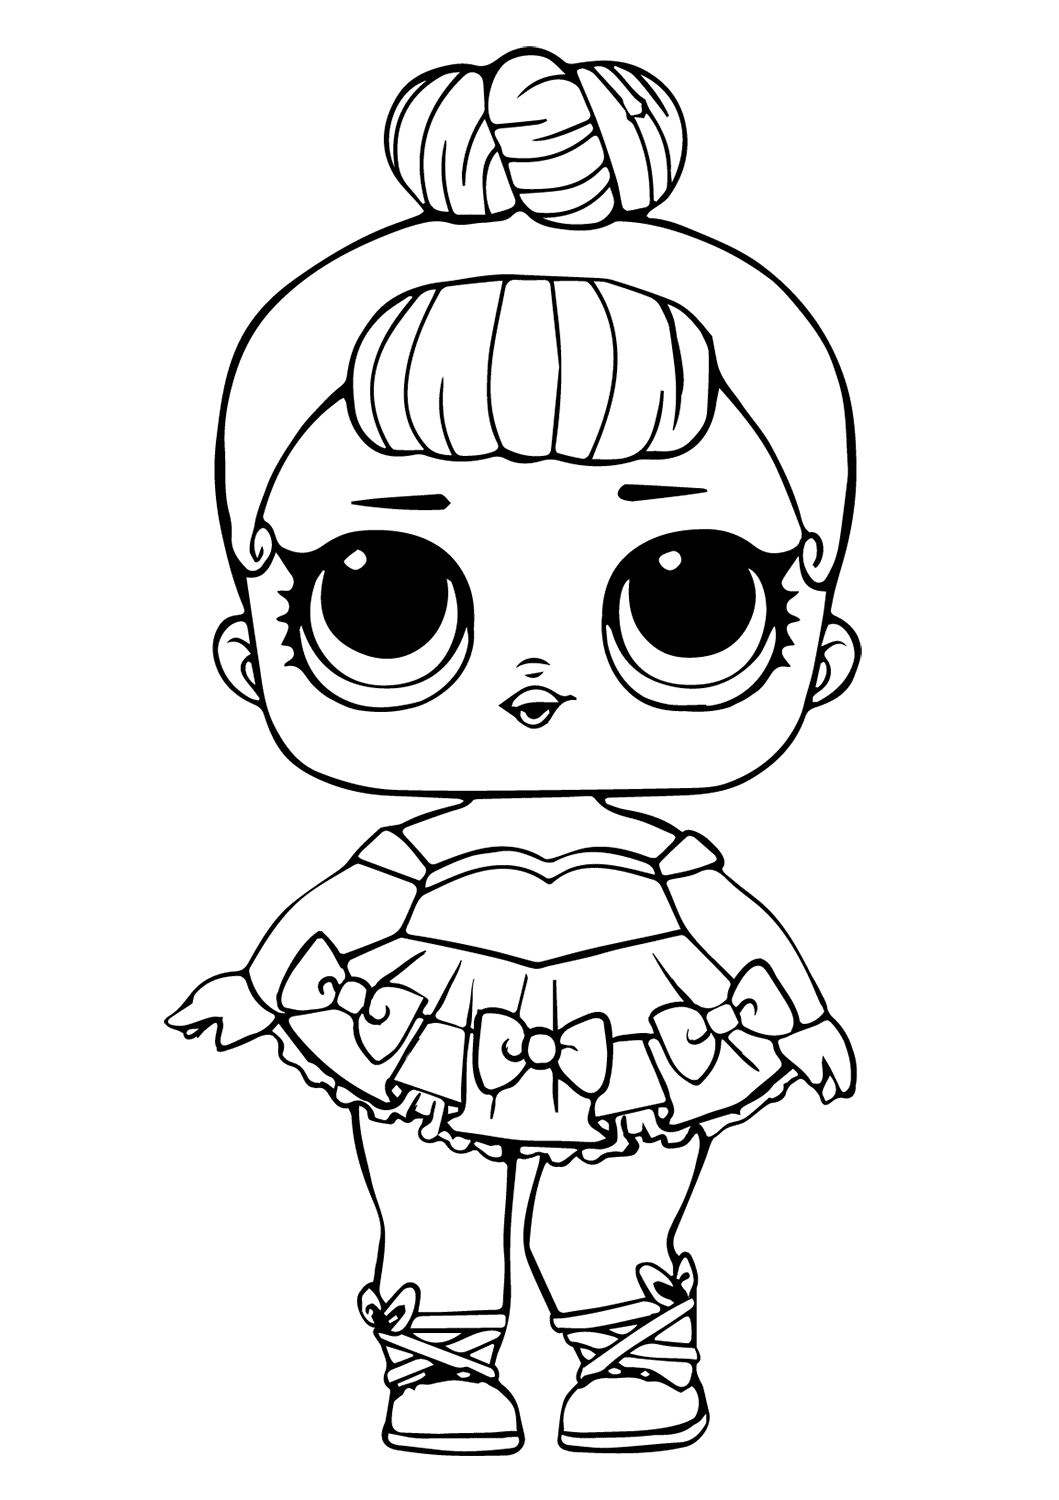 Bon Bon Lol Doll Coloring Page - Free Printable Coloring Pages for Kids